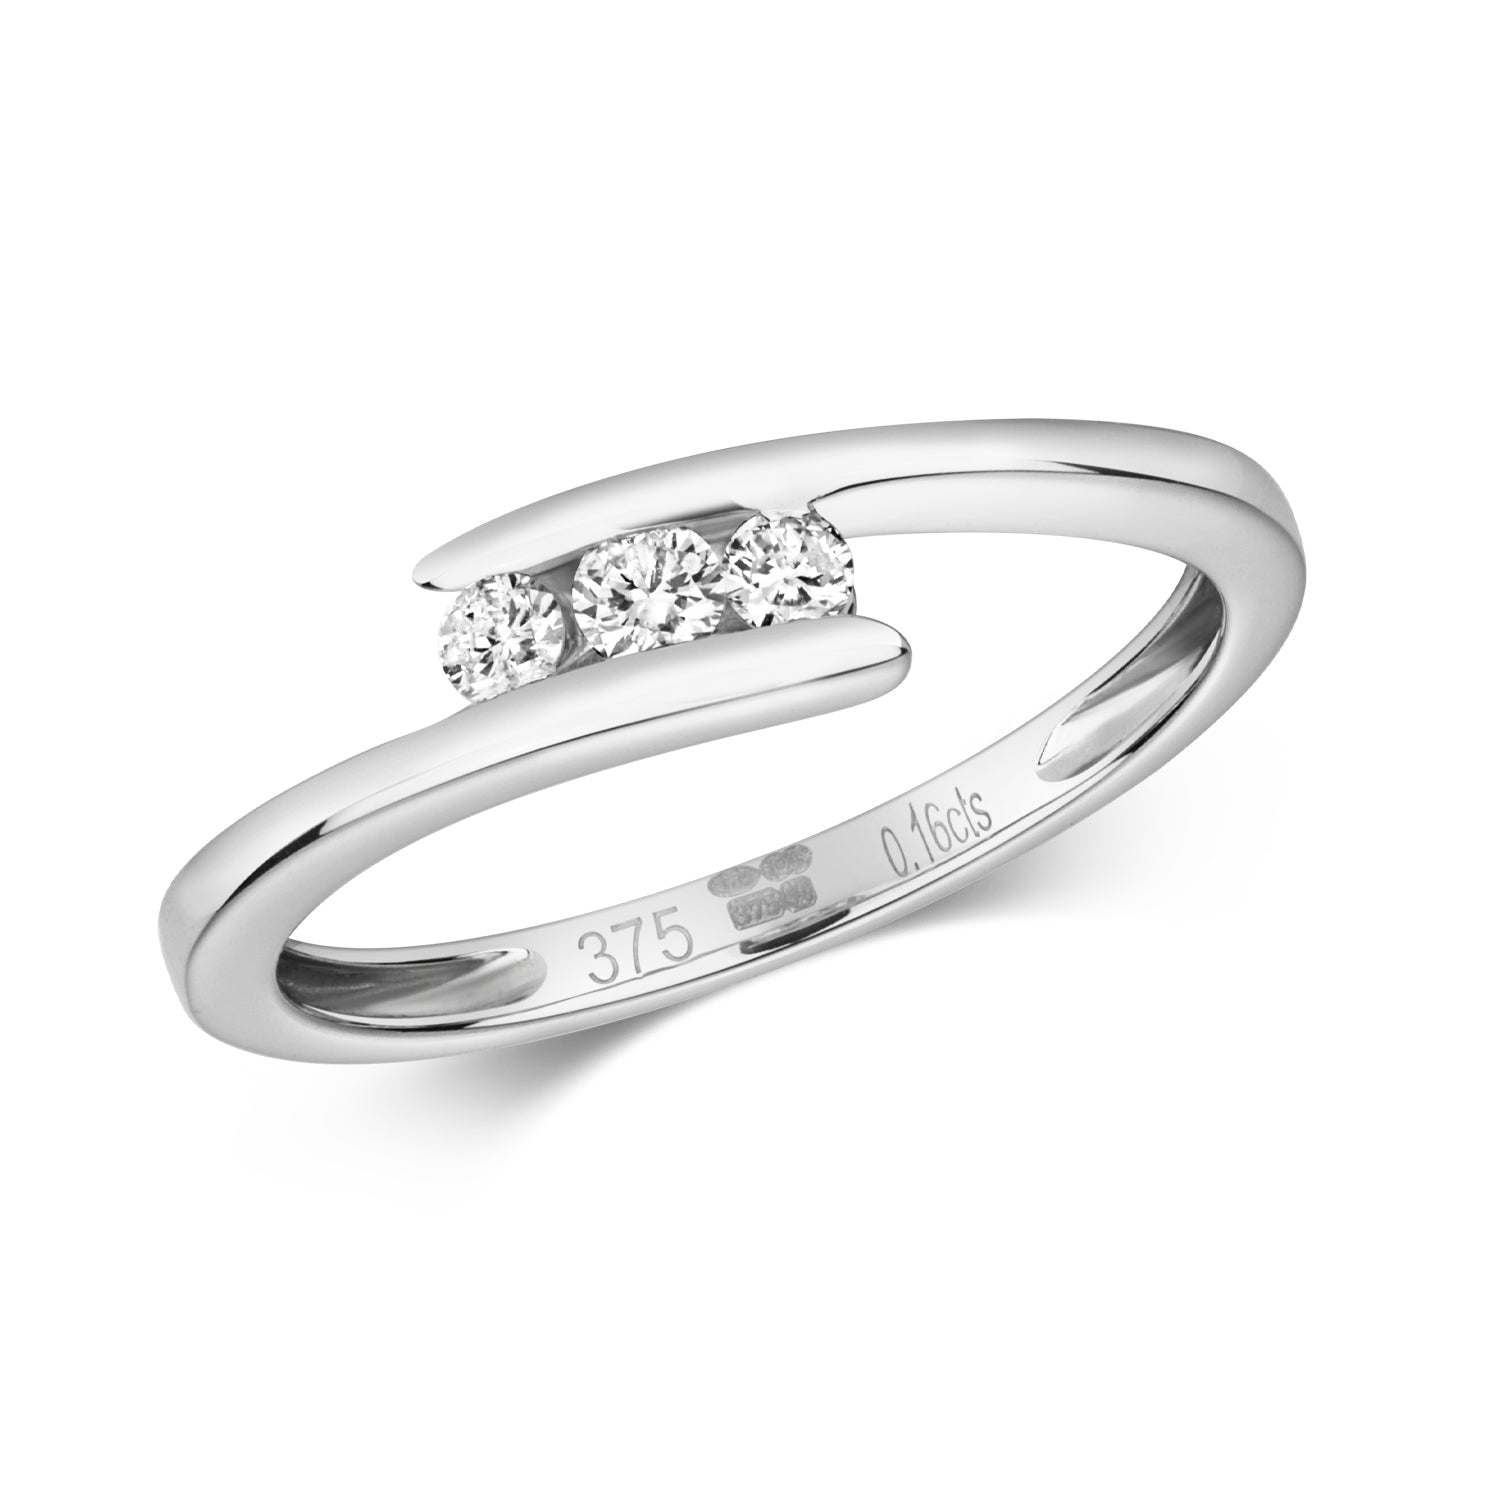 DIAMOND CROSSOVER TRILOGY RING IN 9CT WHITE GOLD